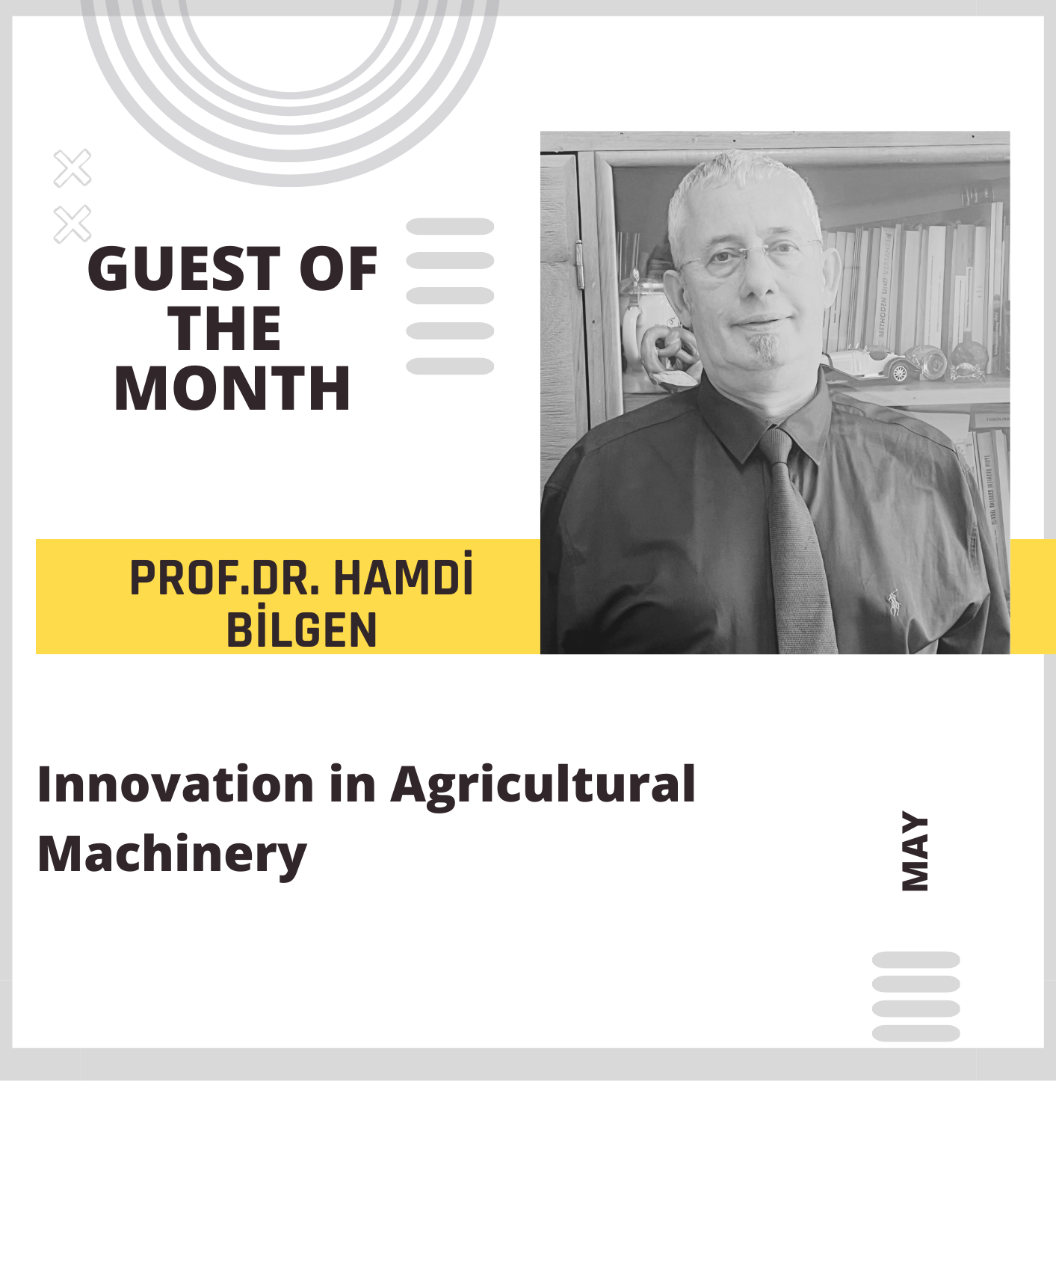 Innovation in Agricultural Machinery